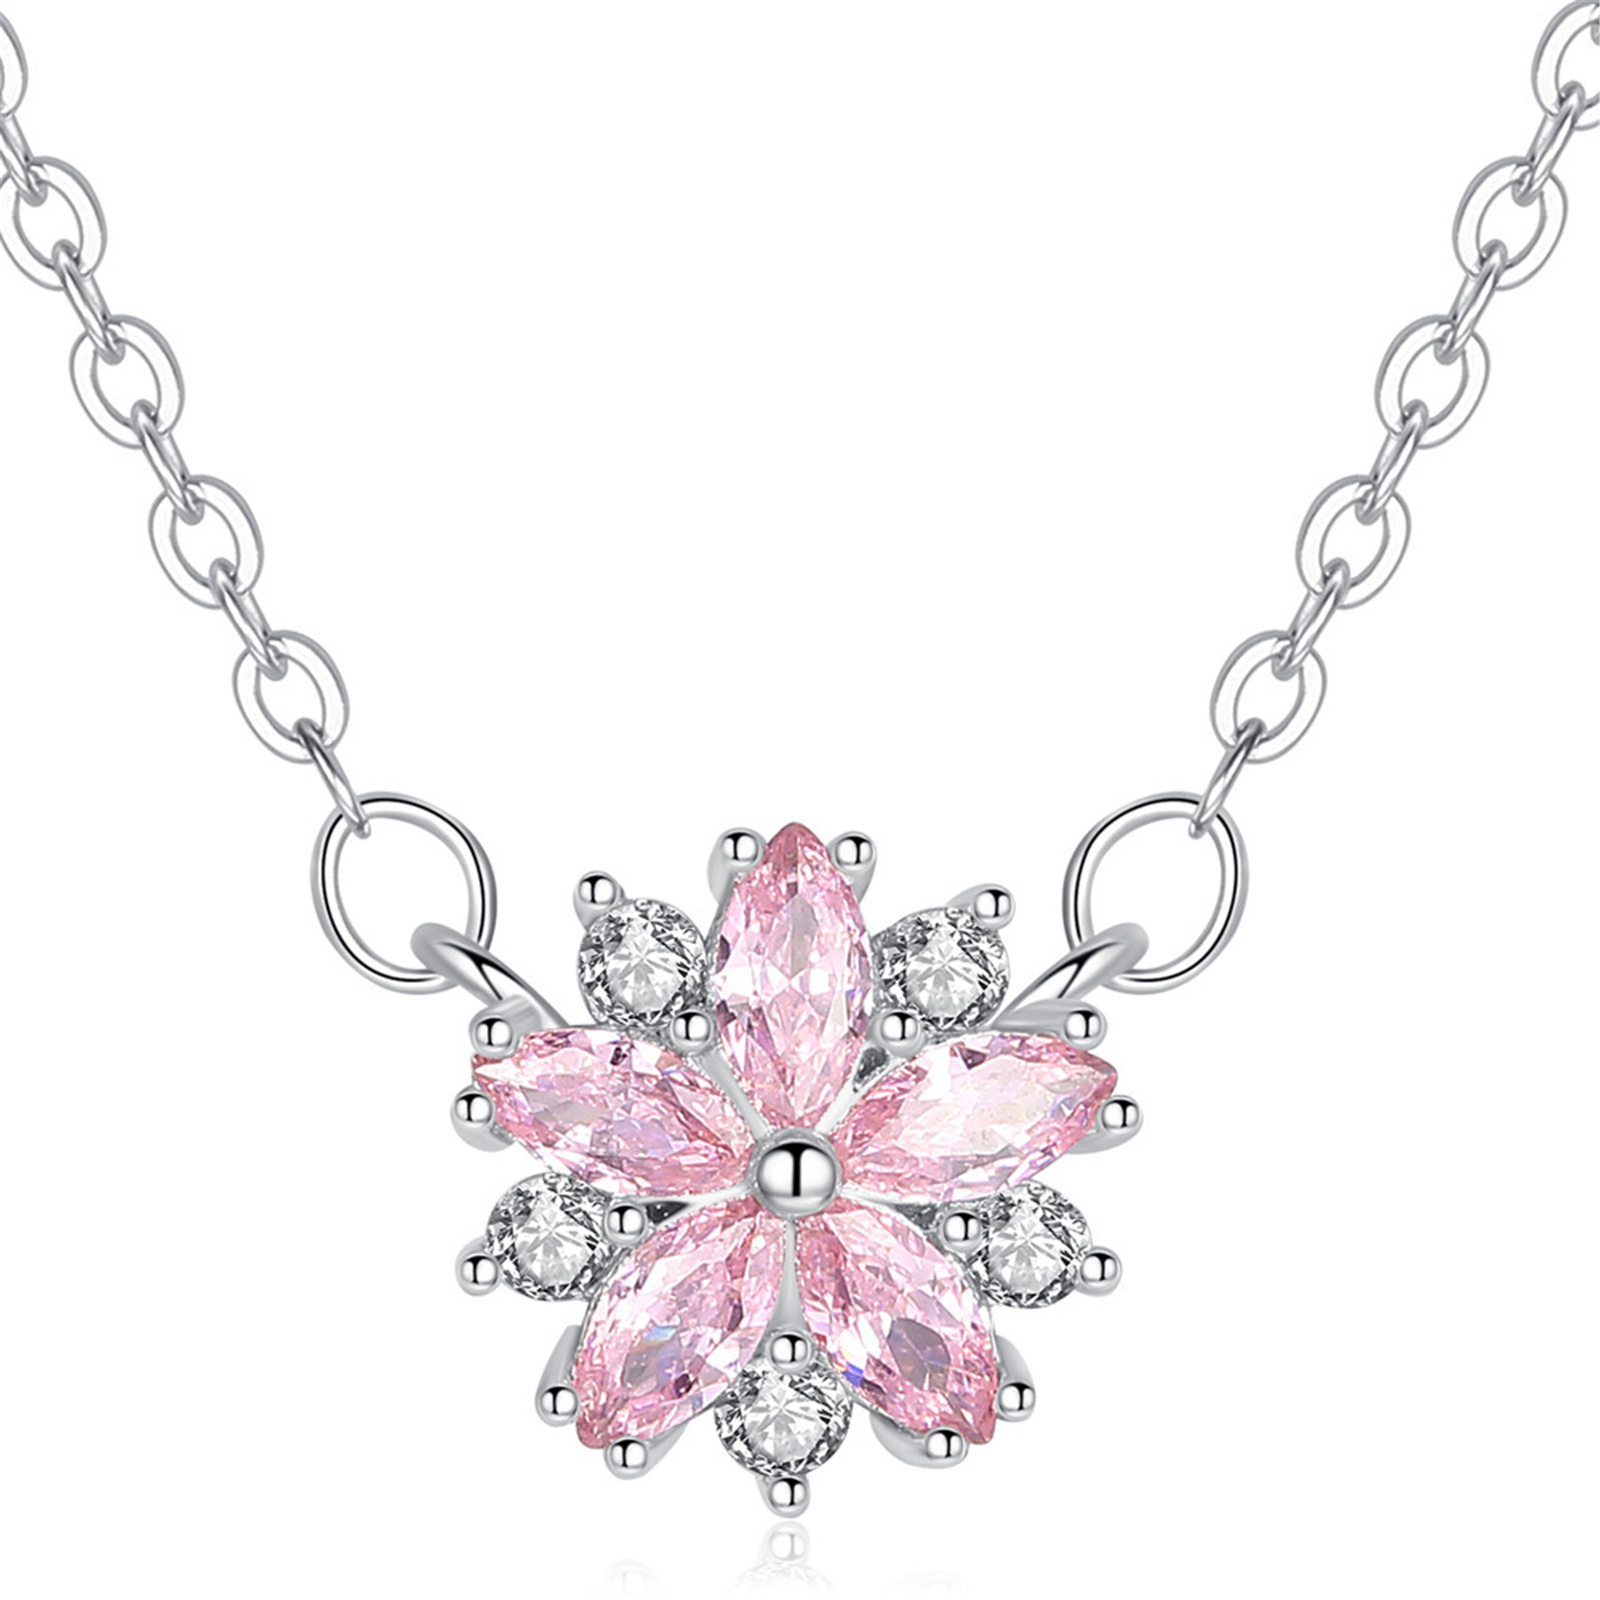 Cherry Blossom Pendant Necklace in Pink Gold